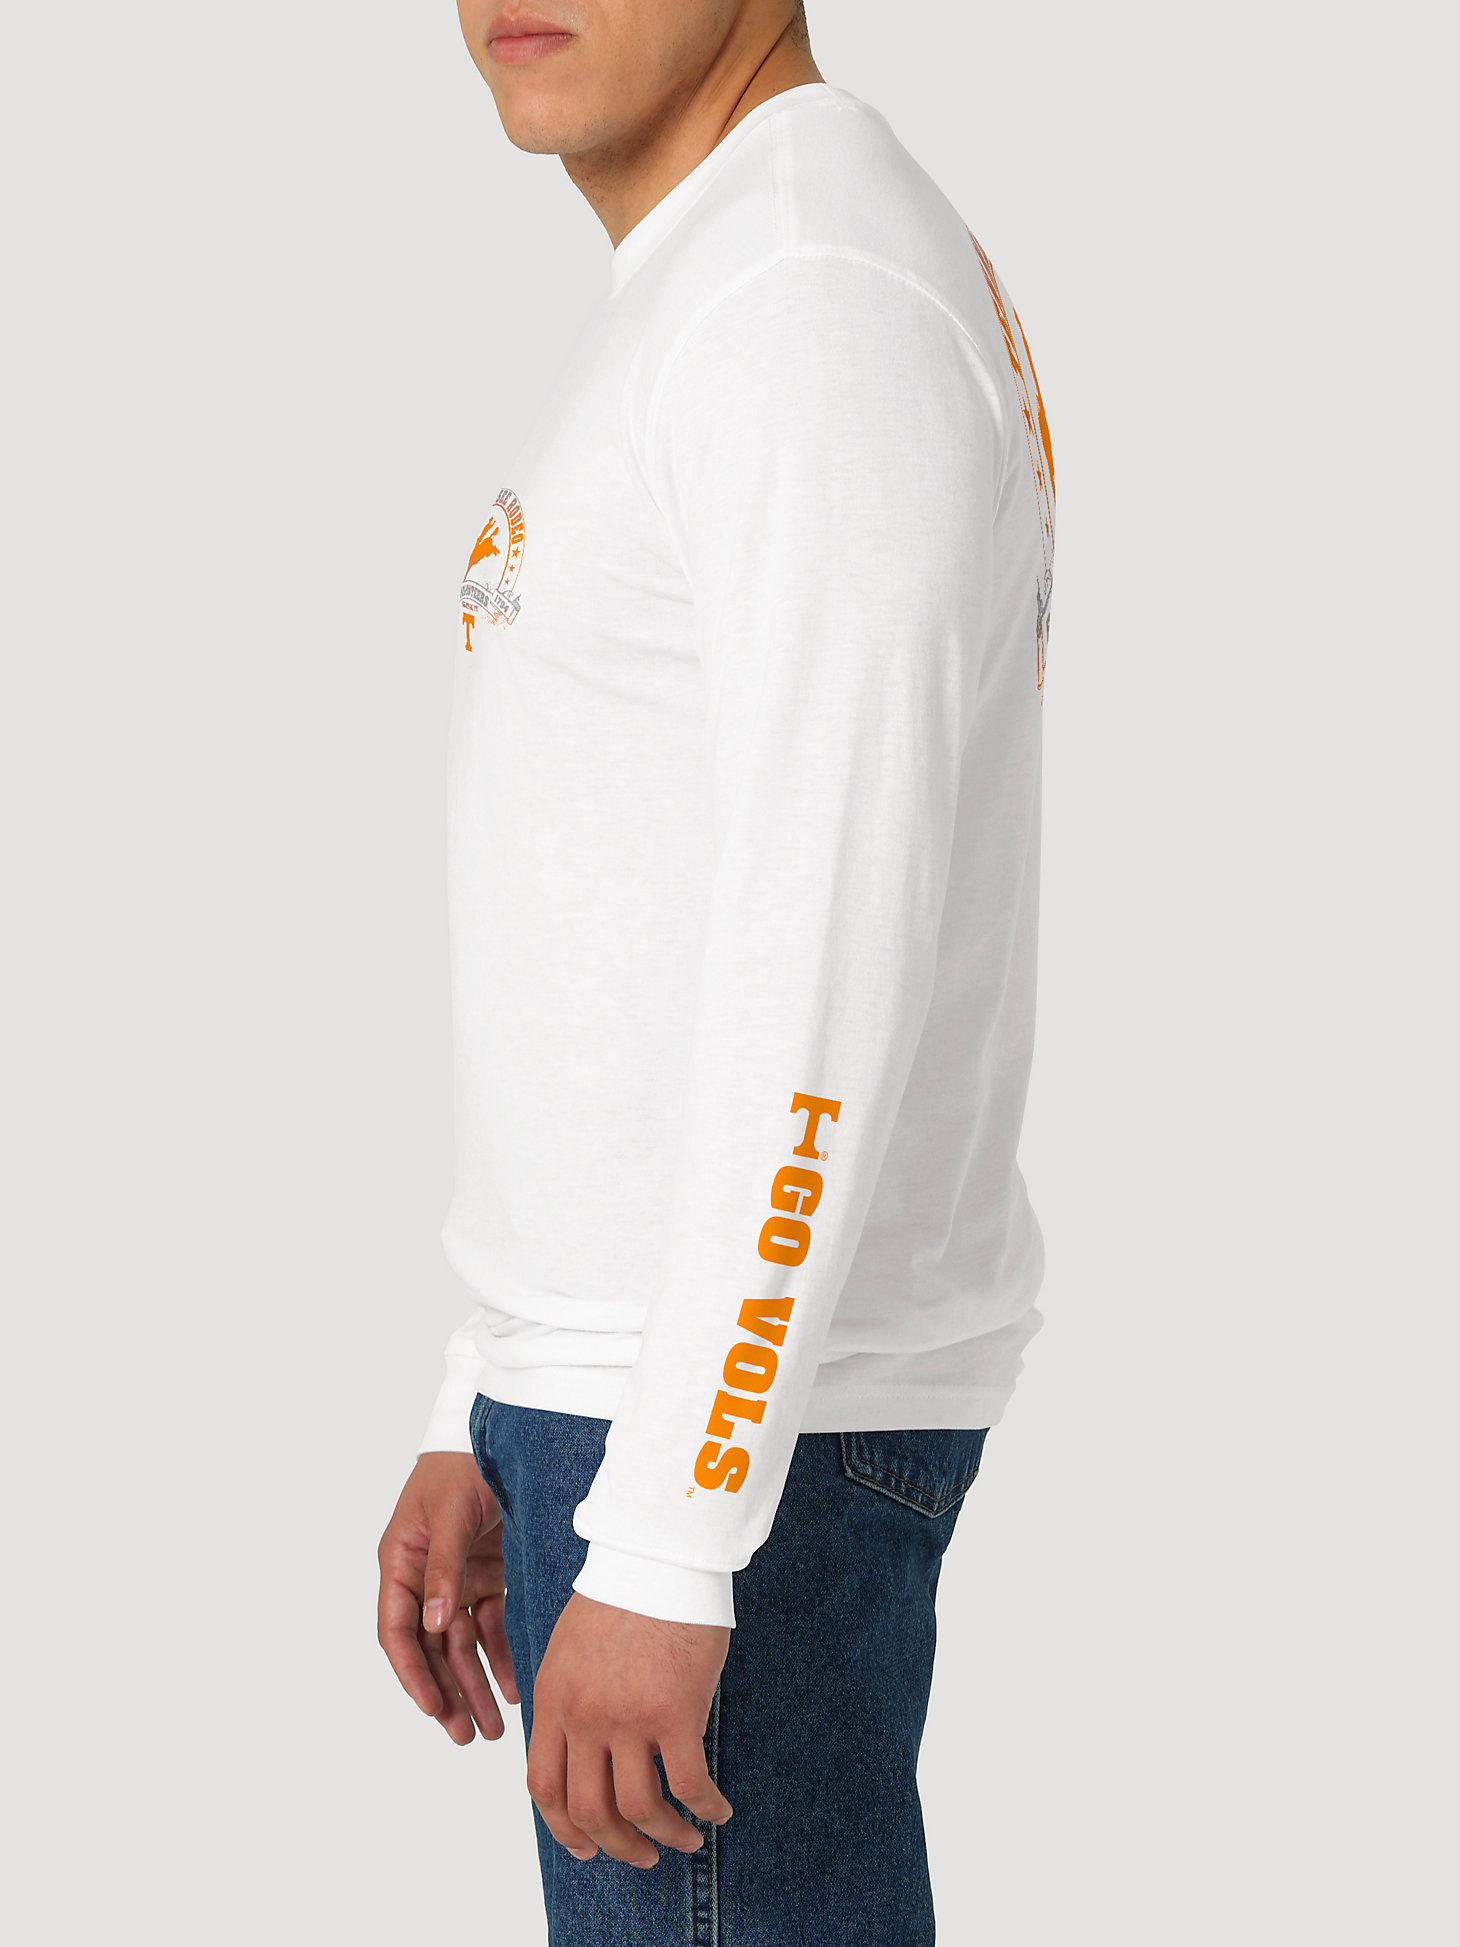 Wrangler Collegiate Rodeo Long Sleeve T-Shirt in University of Tennessee alternative view 2